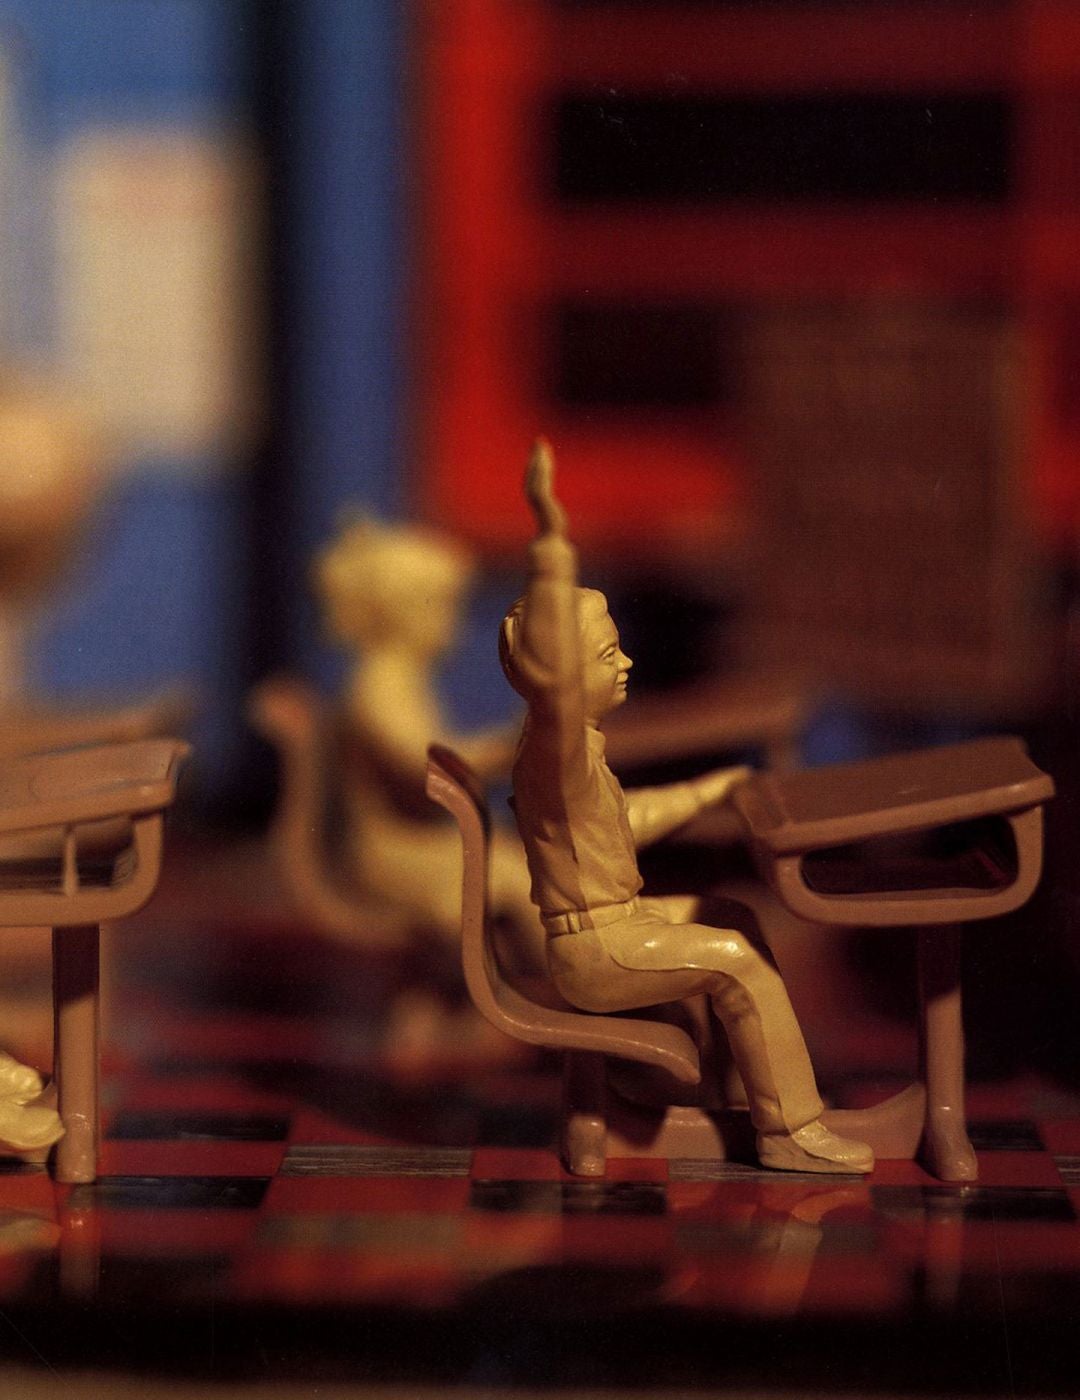 David Levinthal: Small Wonder: Worlds in a Box